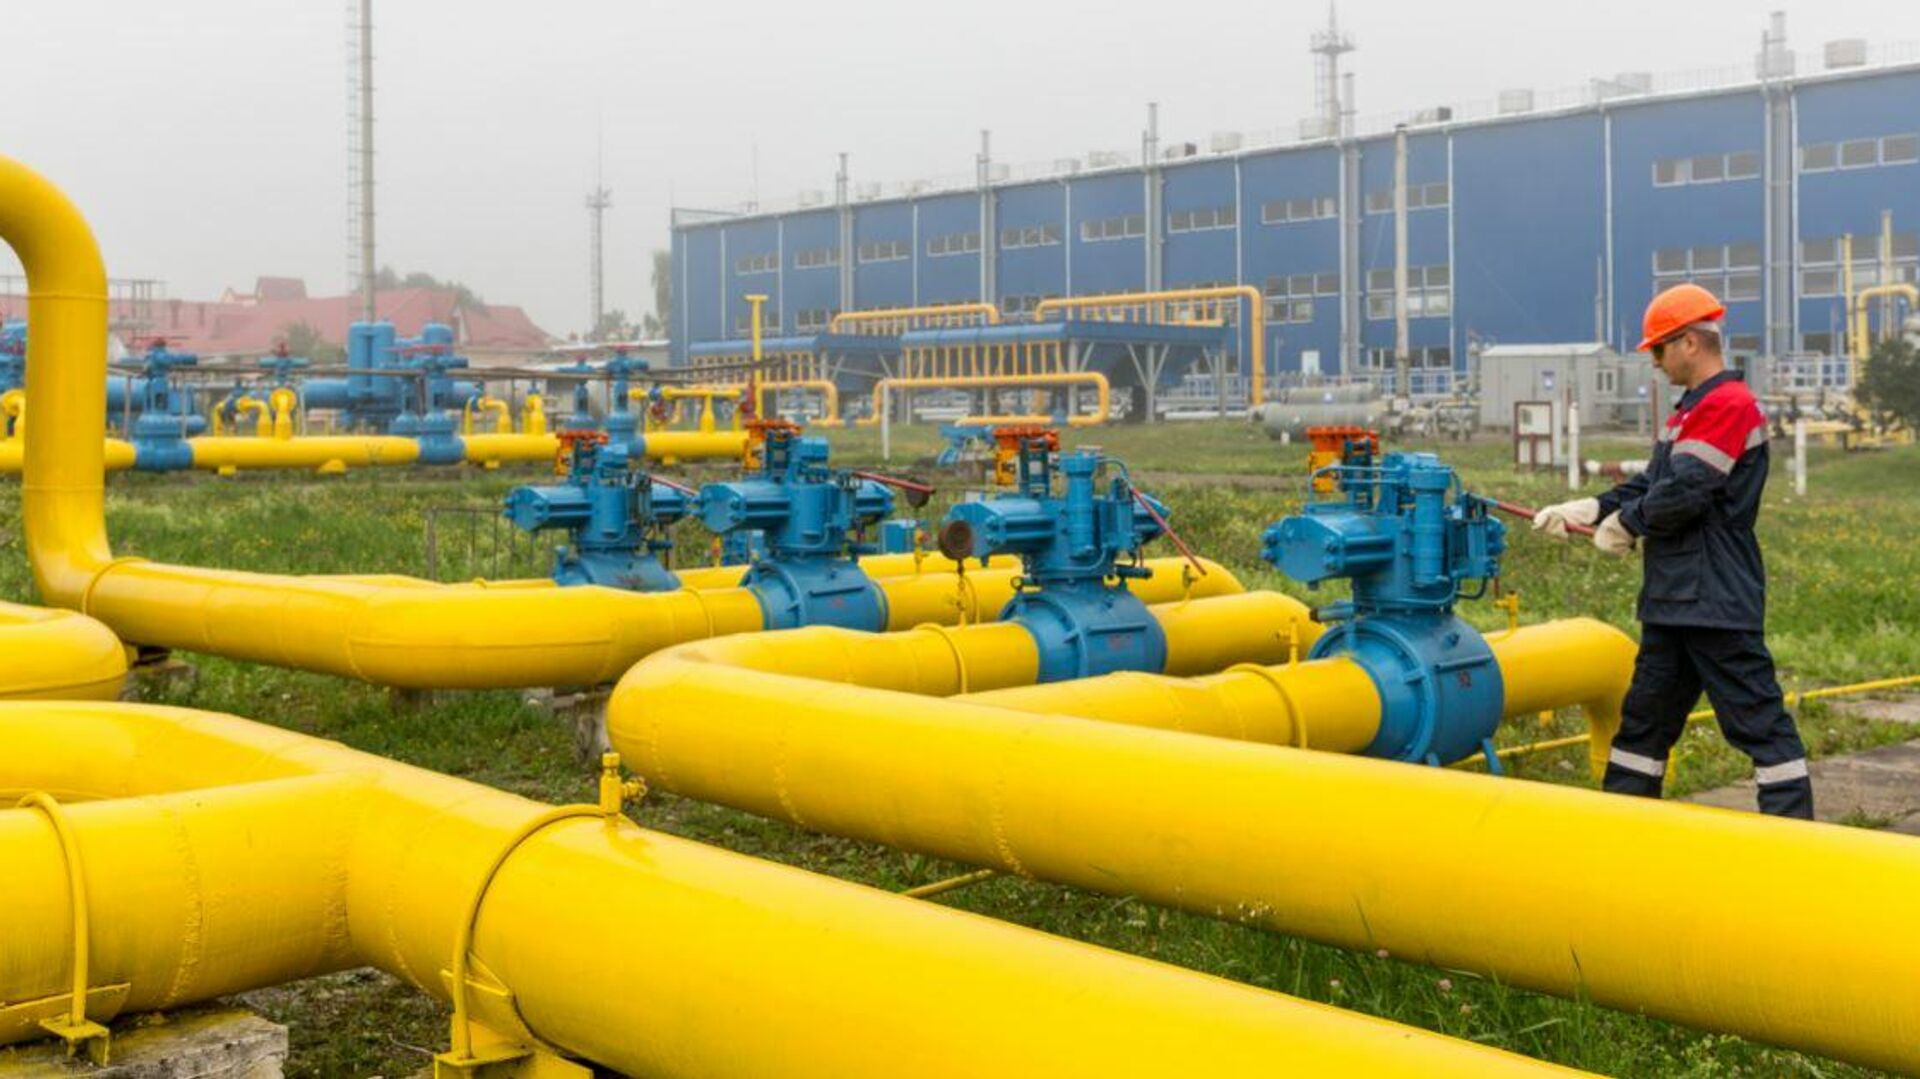 Media: EU discussing guarantees for companies looking to store gas in Ukraine